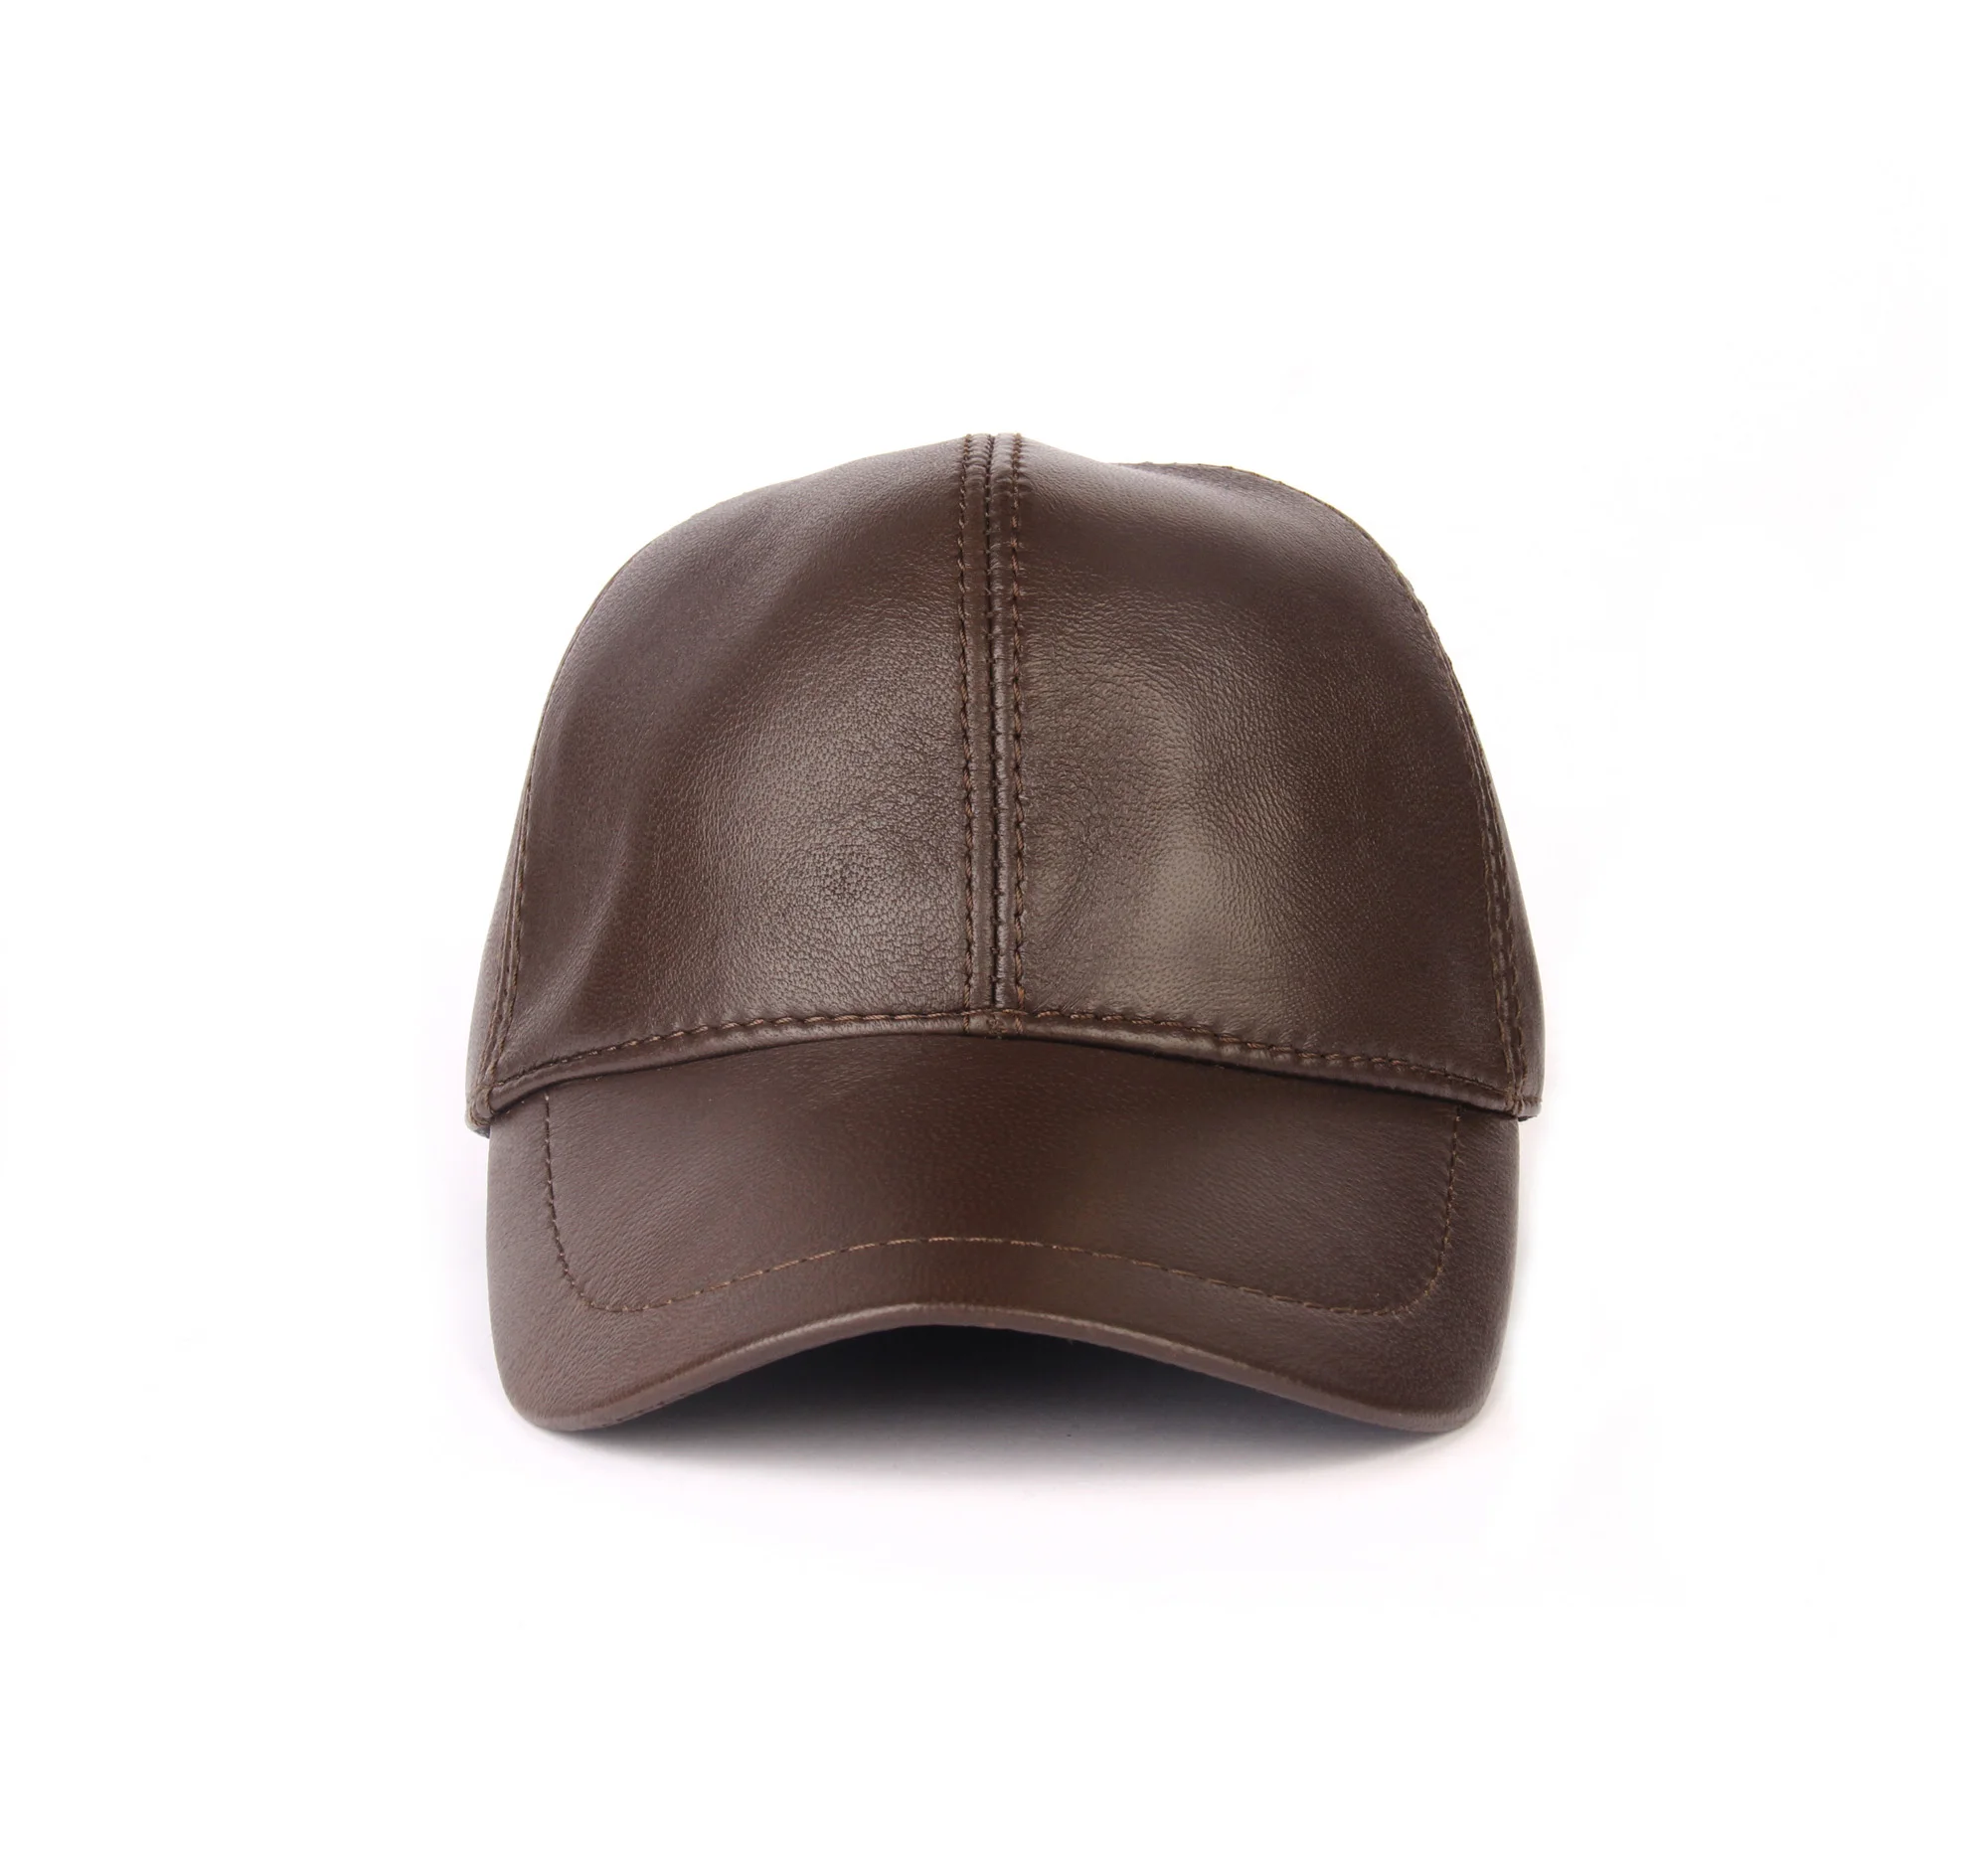 handmade-brown-baseball-caps-for-cold-winter-autumn-with-real-sheep-skin-leather-woolen-fur-inside-ear-covers-men-accessories